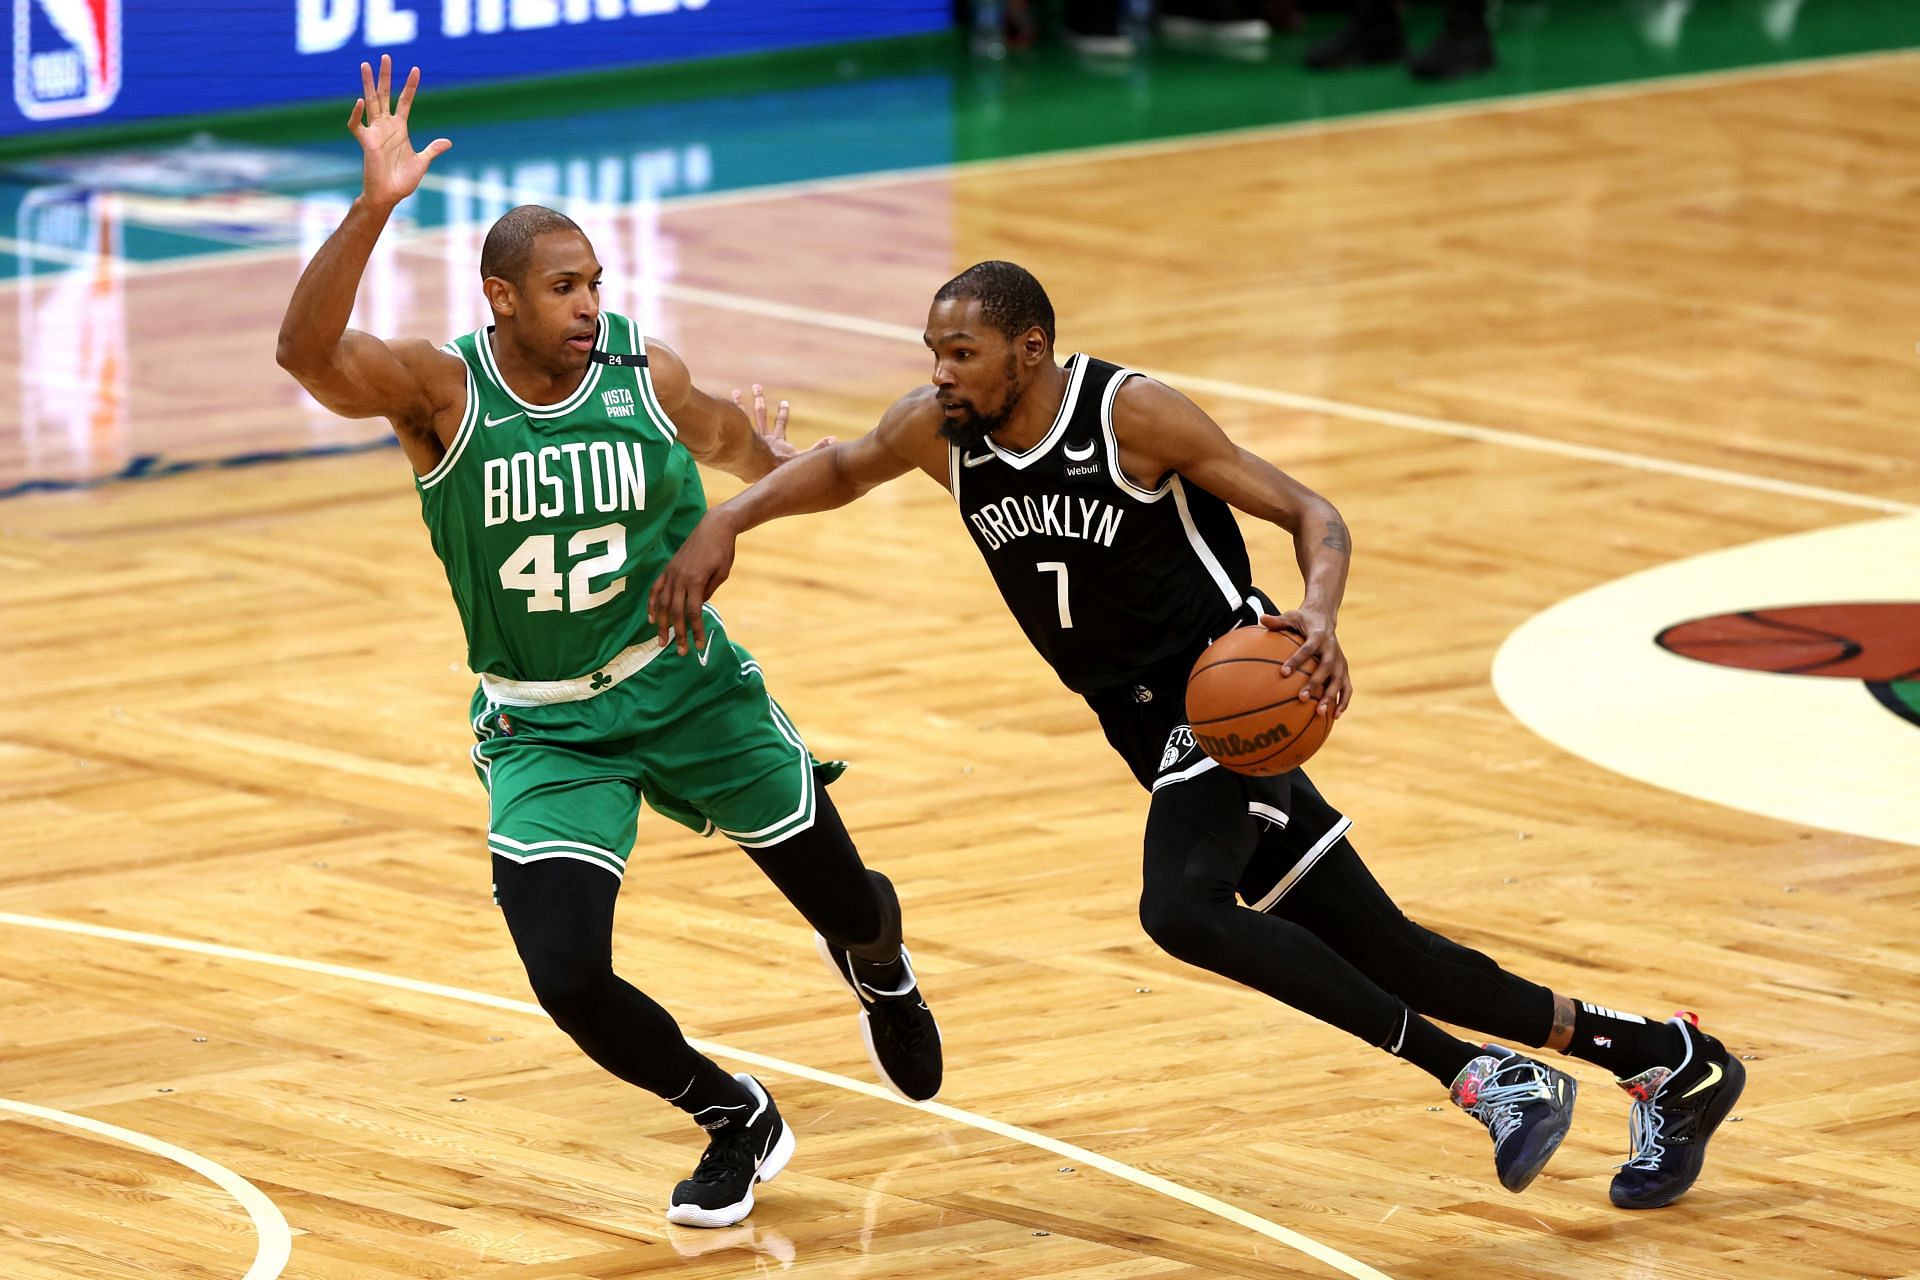 KD in action against the Boston Celtics